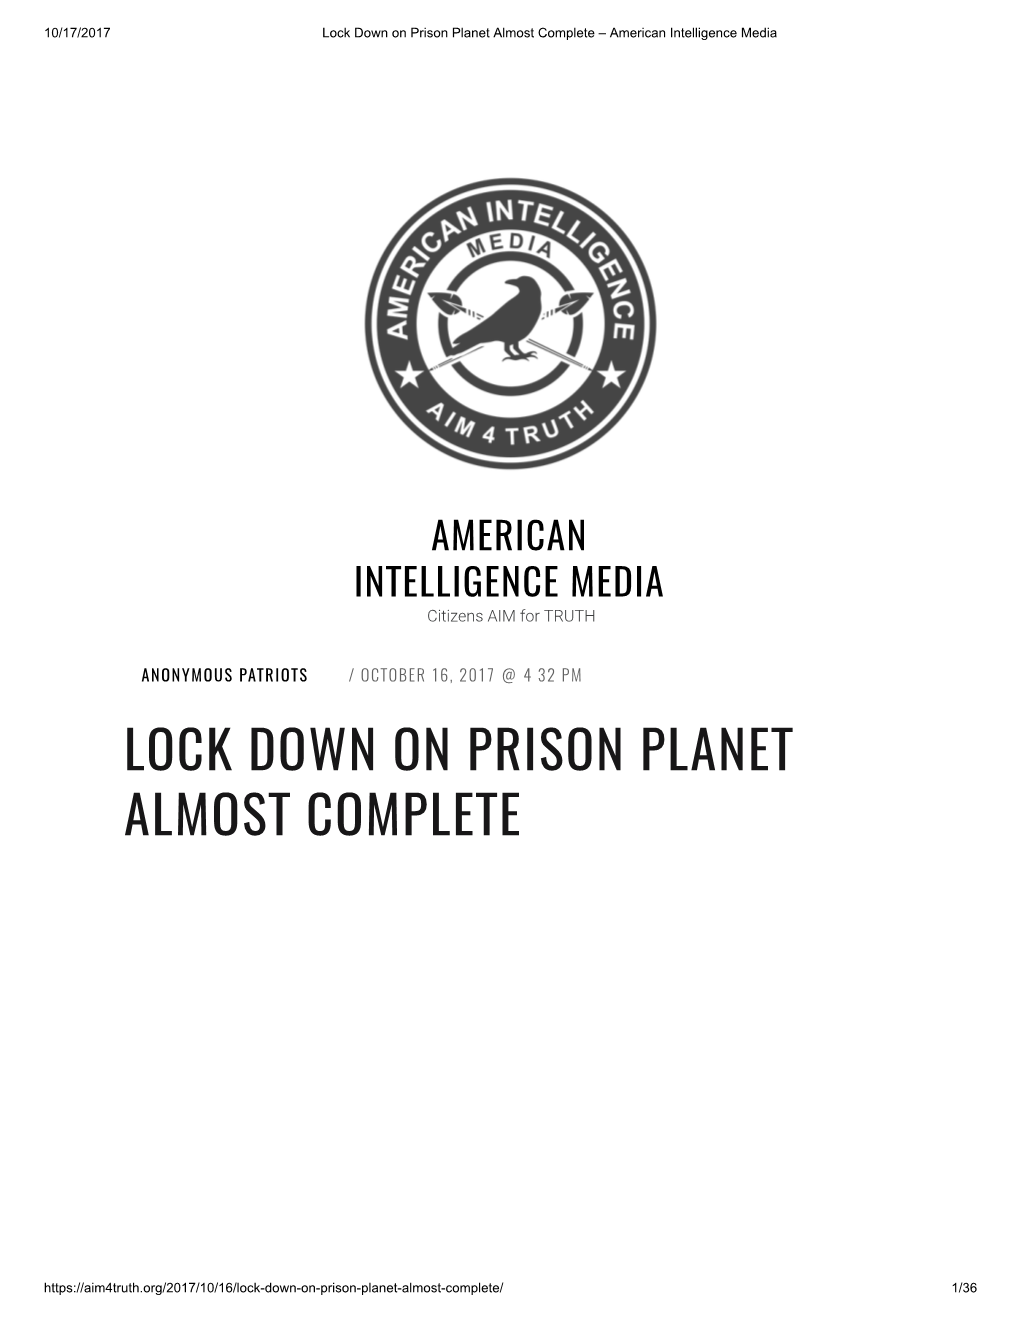 Lock Down on Prison Planet Almost Complete – American Intelligence Media